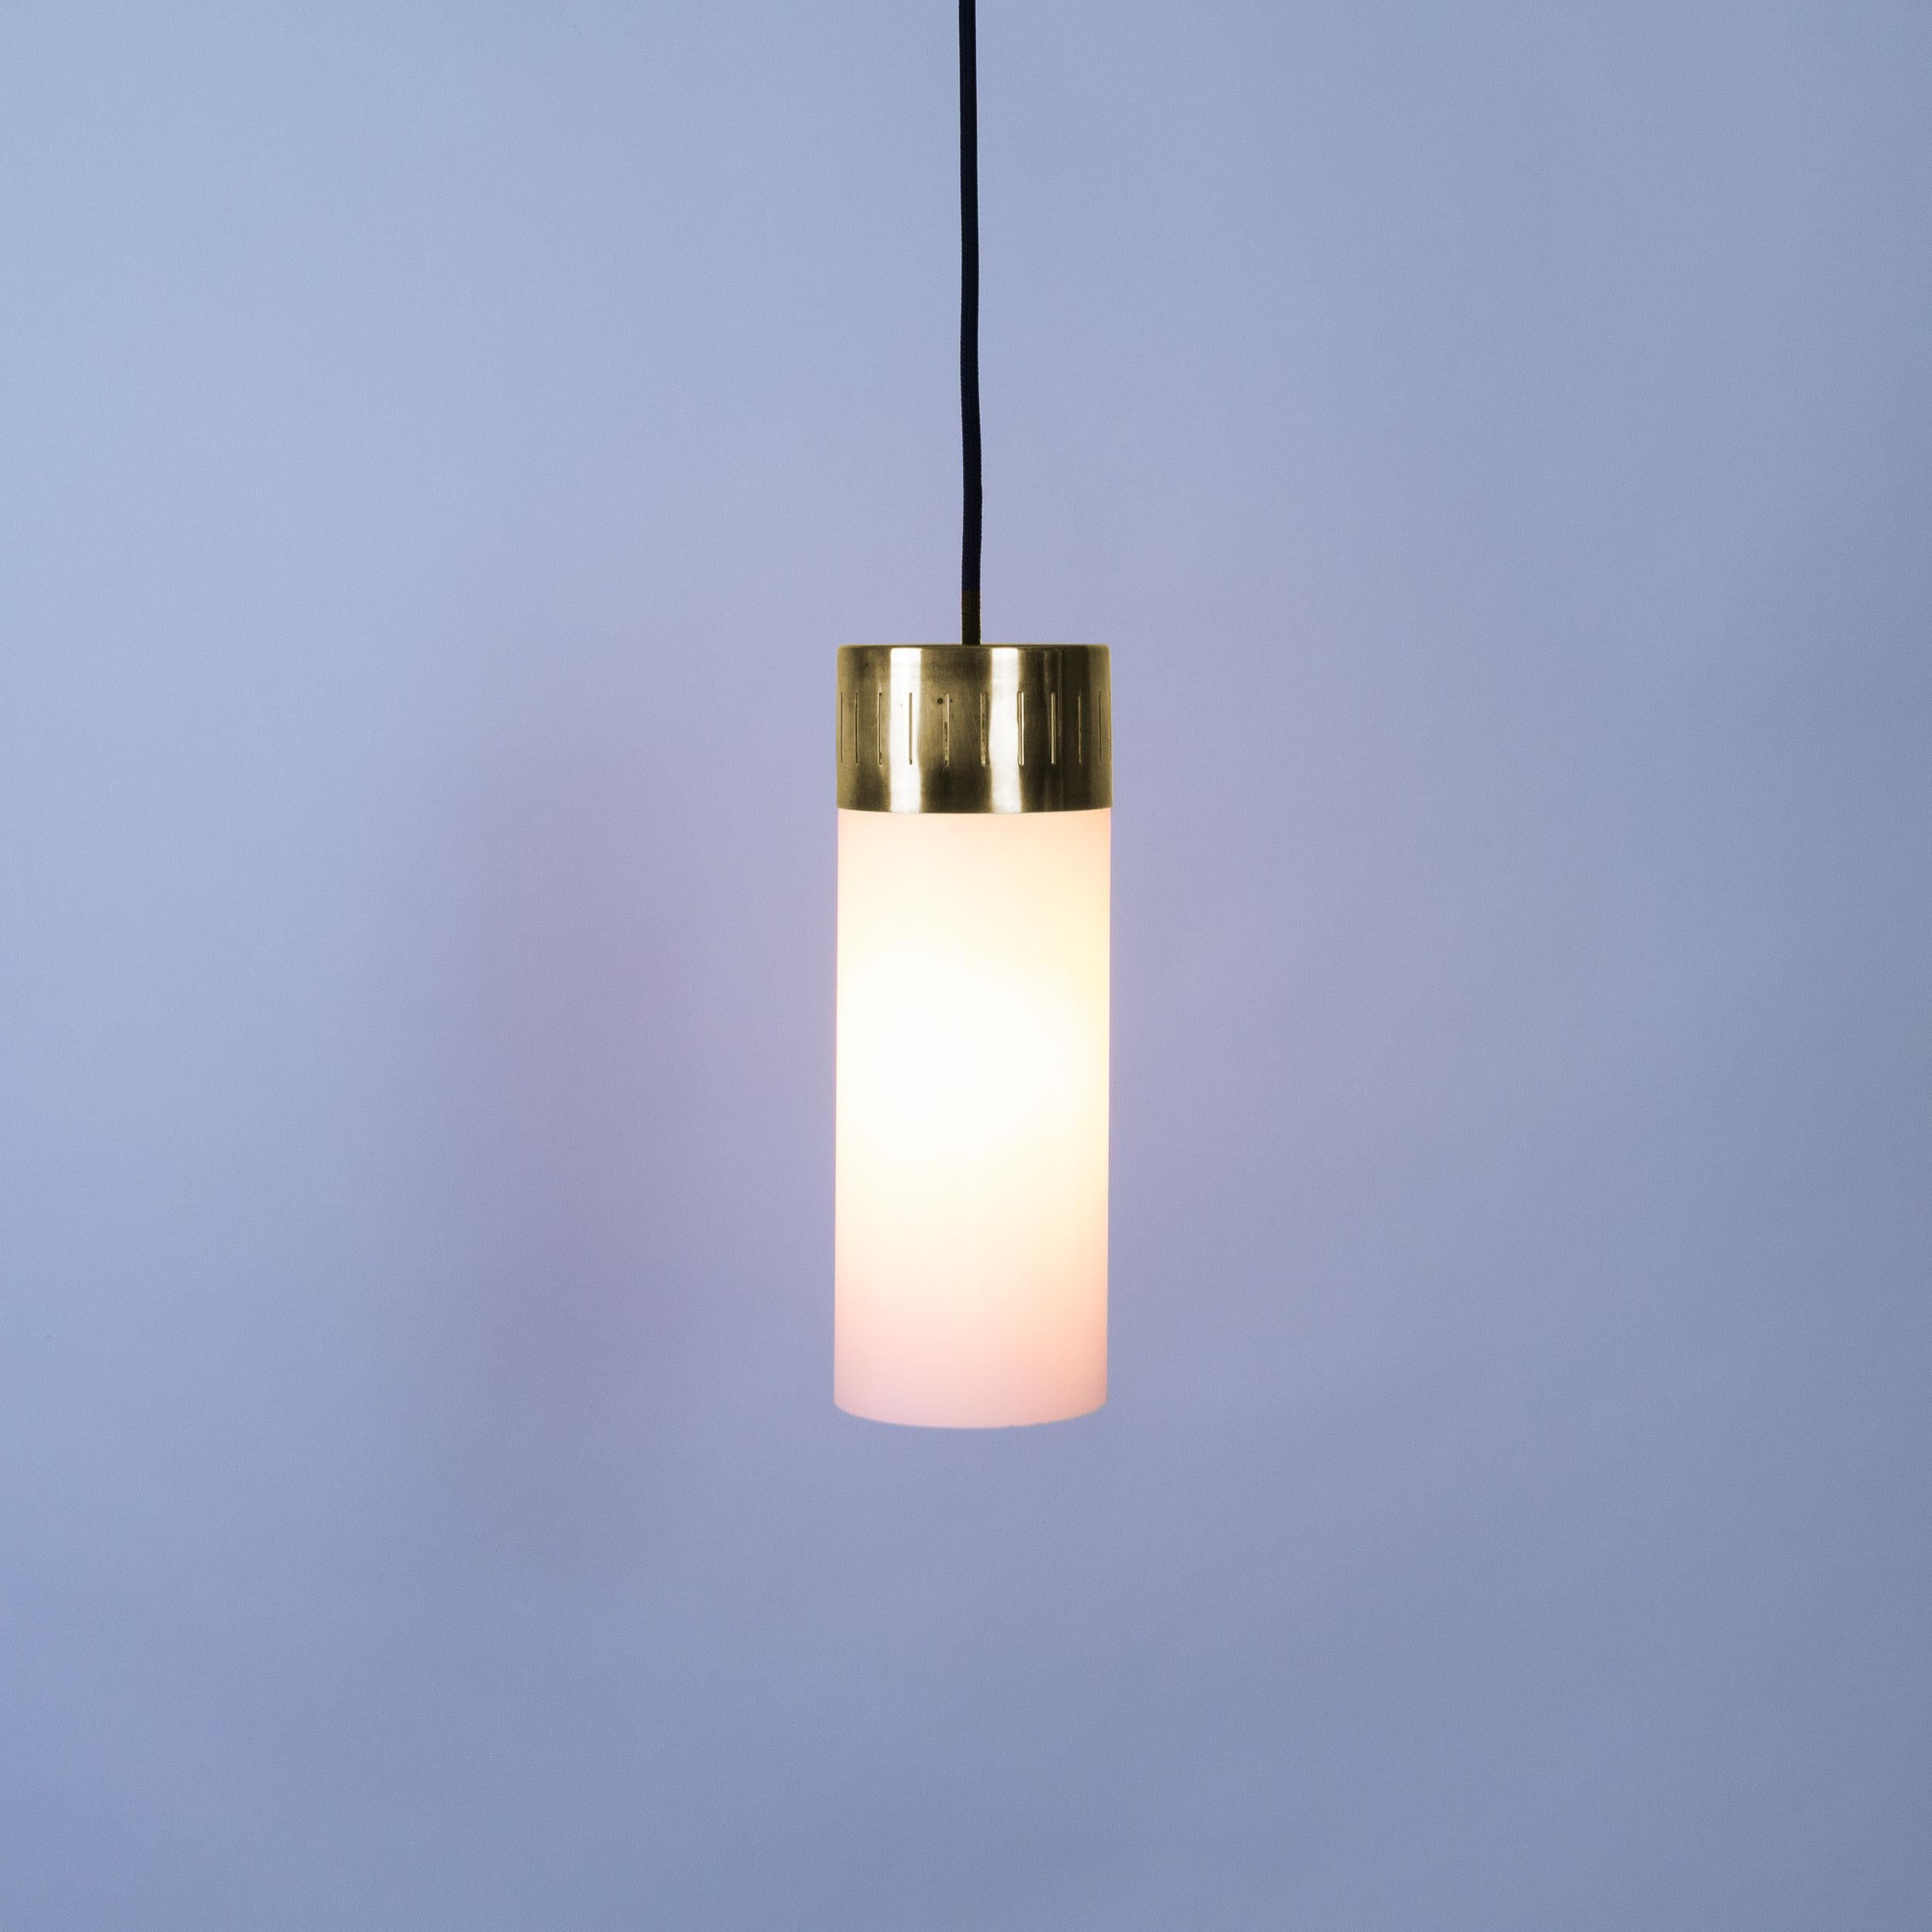 Set of 12 Brass and Opaque Glass Pendant Lights, Italy, 1940s (Mitte des 20. Jahrhunderts)